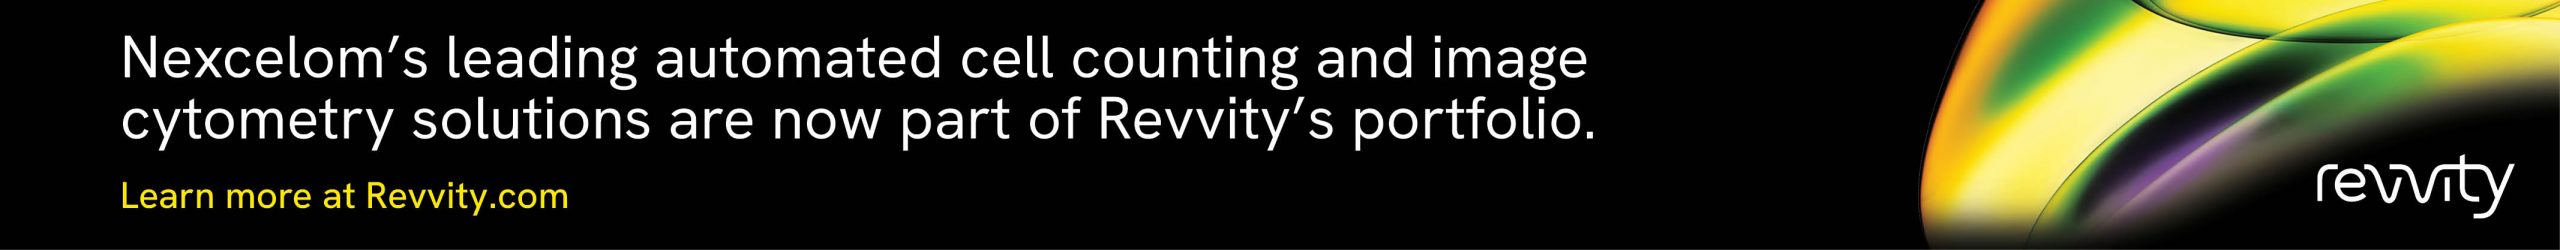 Nexcelom's leading automated cell counting and image cytometry solutions are now part of Revvity's portfolio. Learn more at revvity.com